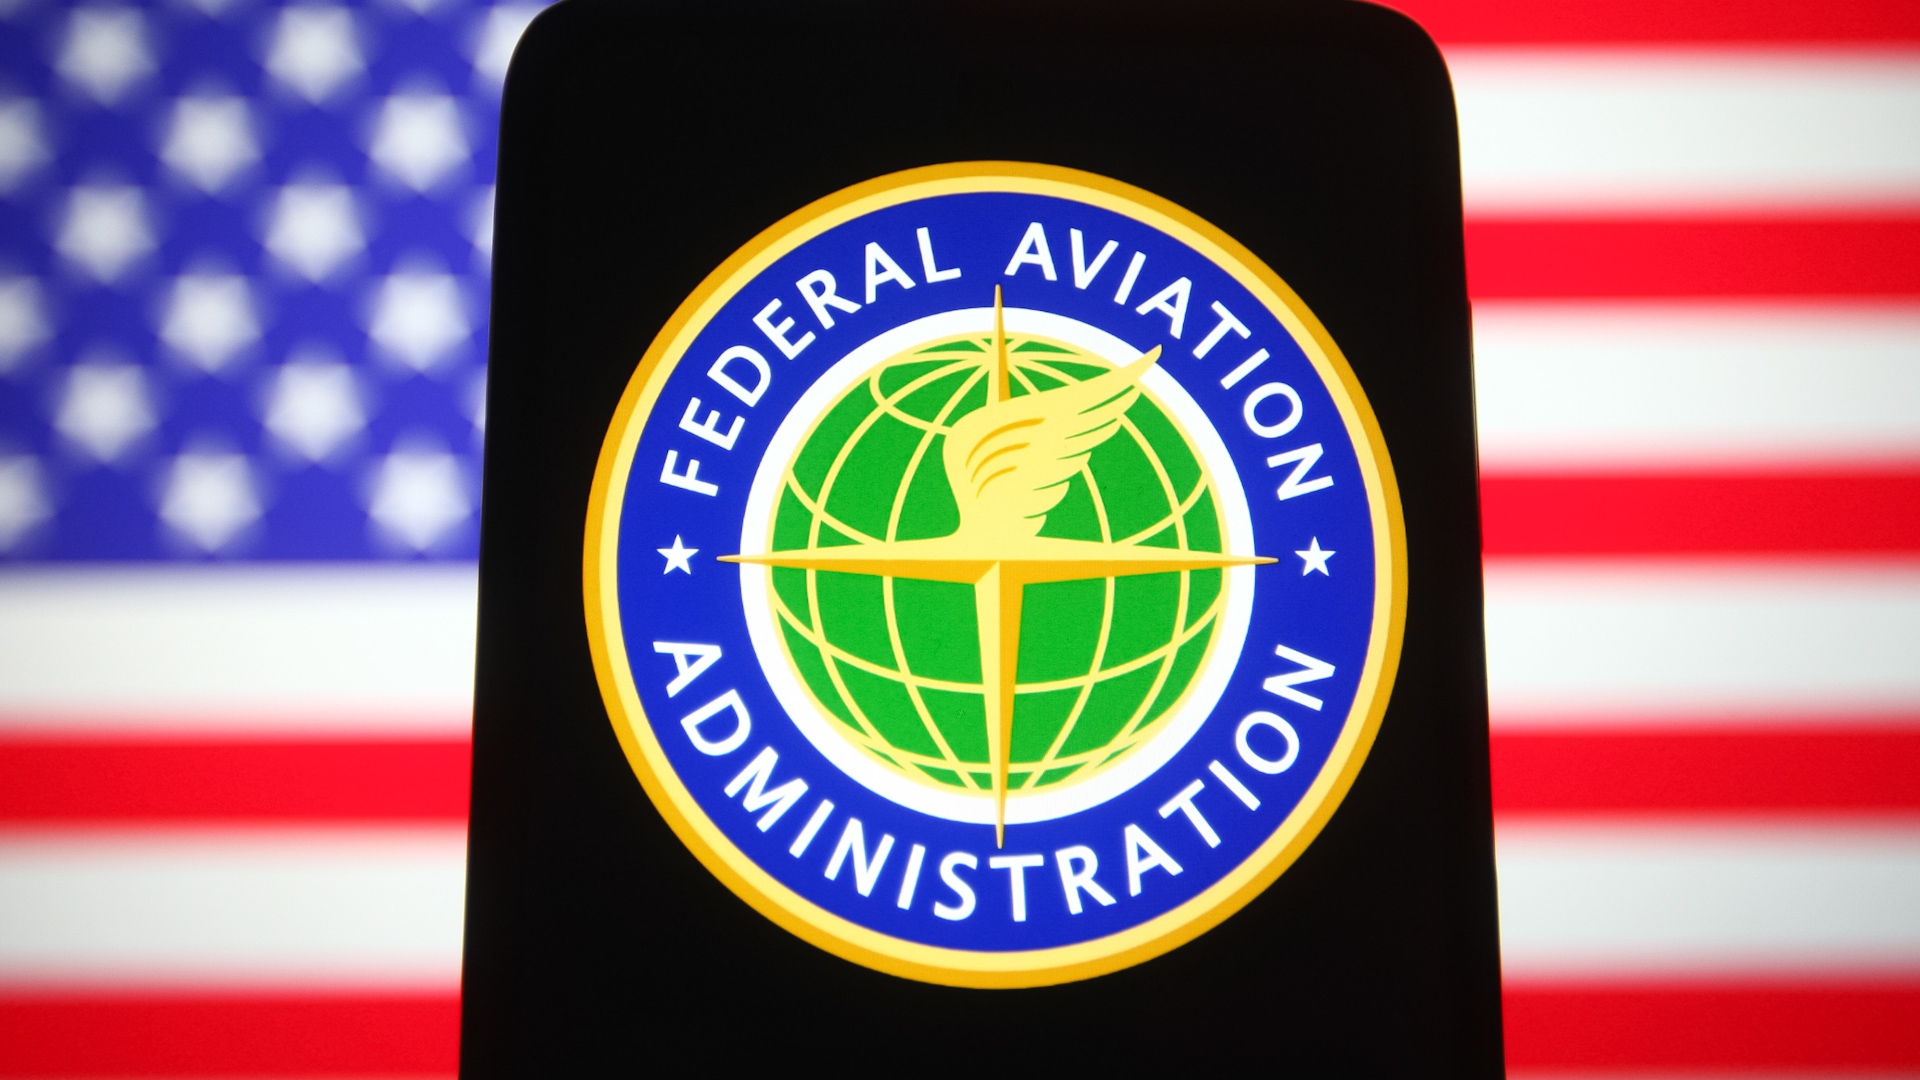 The Senate reauthorized the FAA with a 5-year, 5 billion bill to enhance air travel safety and customer service.